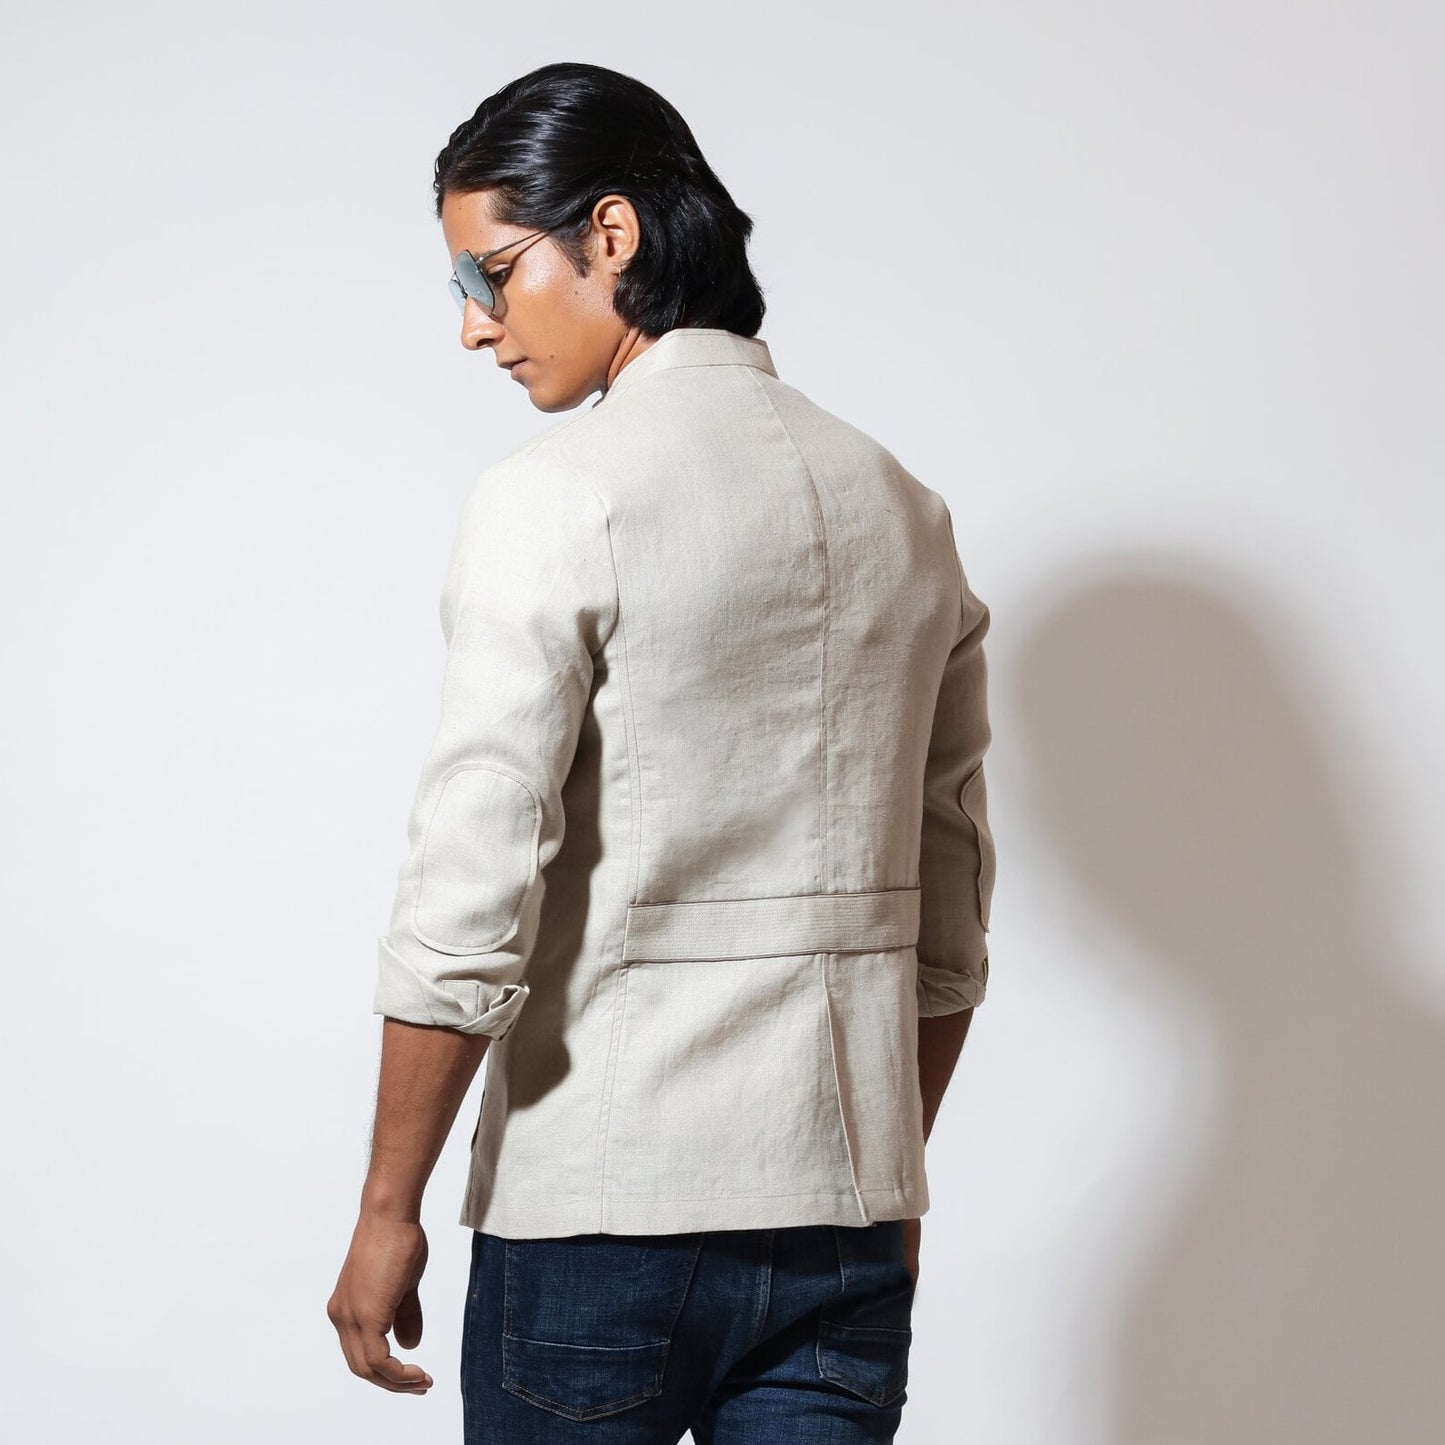 Shaket in linen with zipper at front pocket